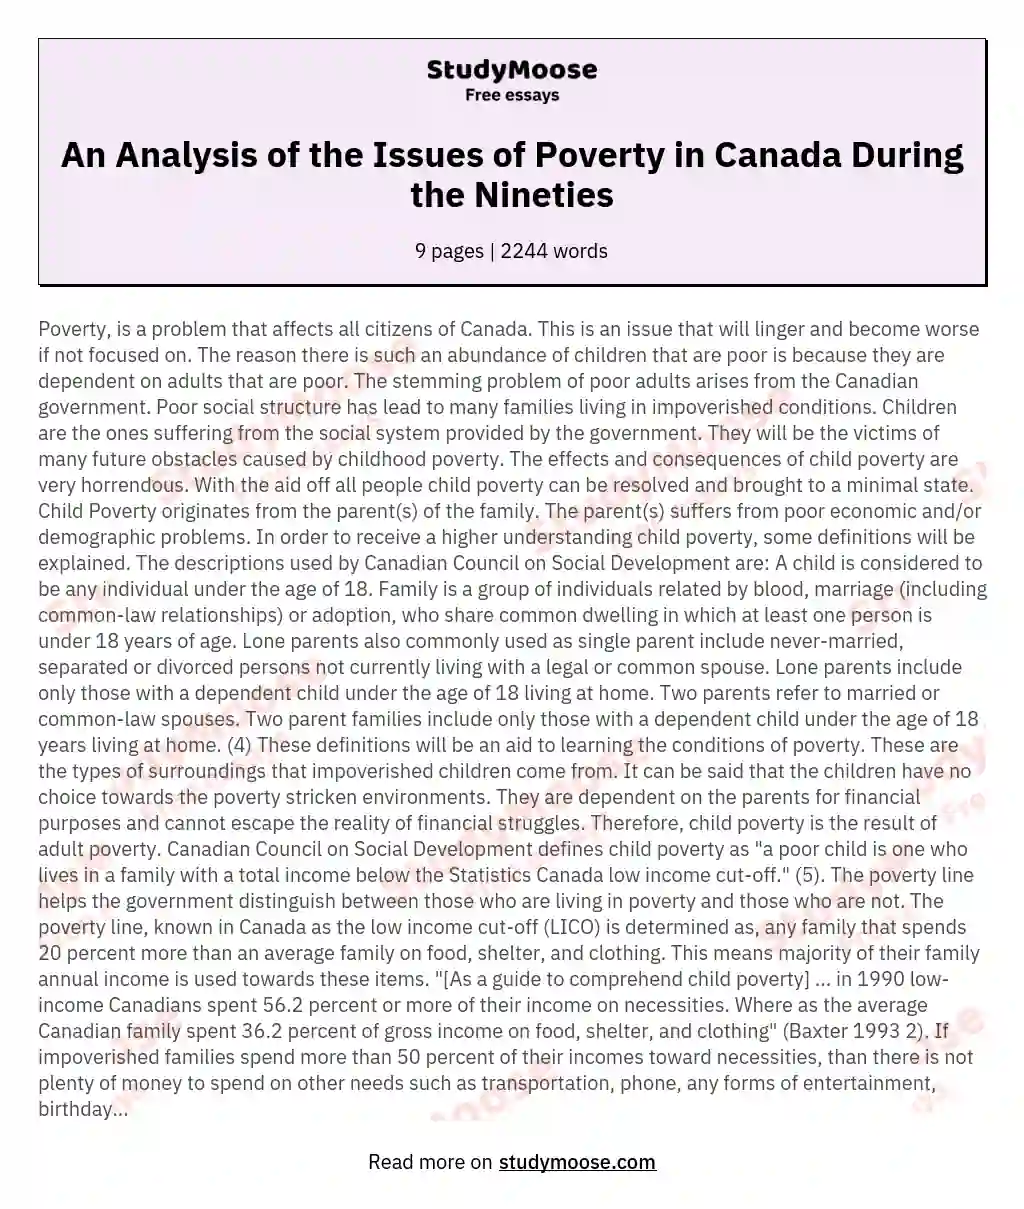 An Analysis of the Issues of Poverty in Canada During the Nineties essay